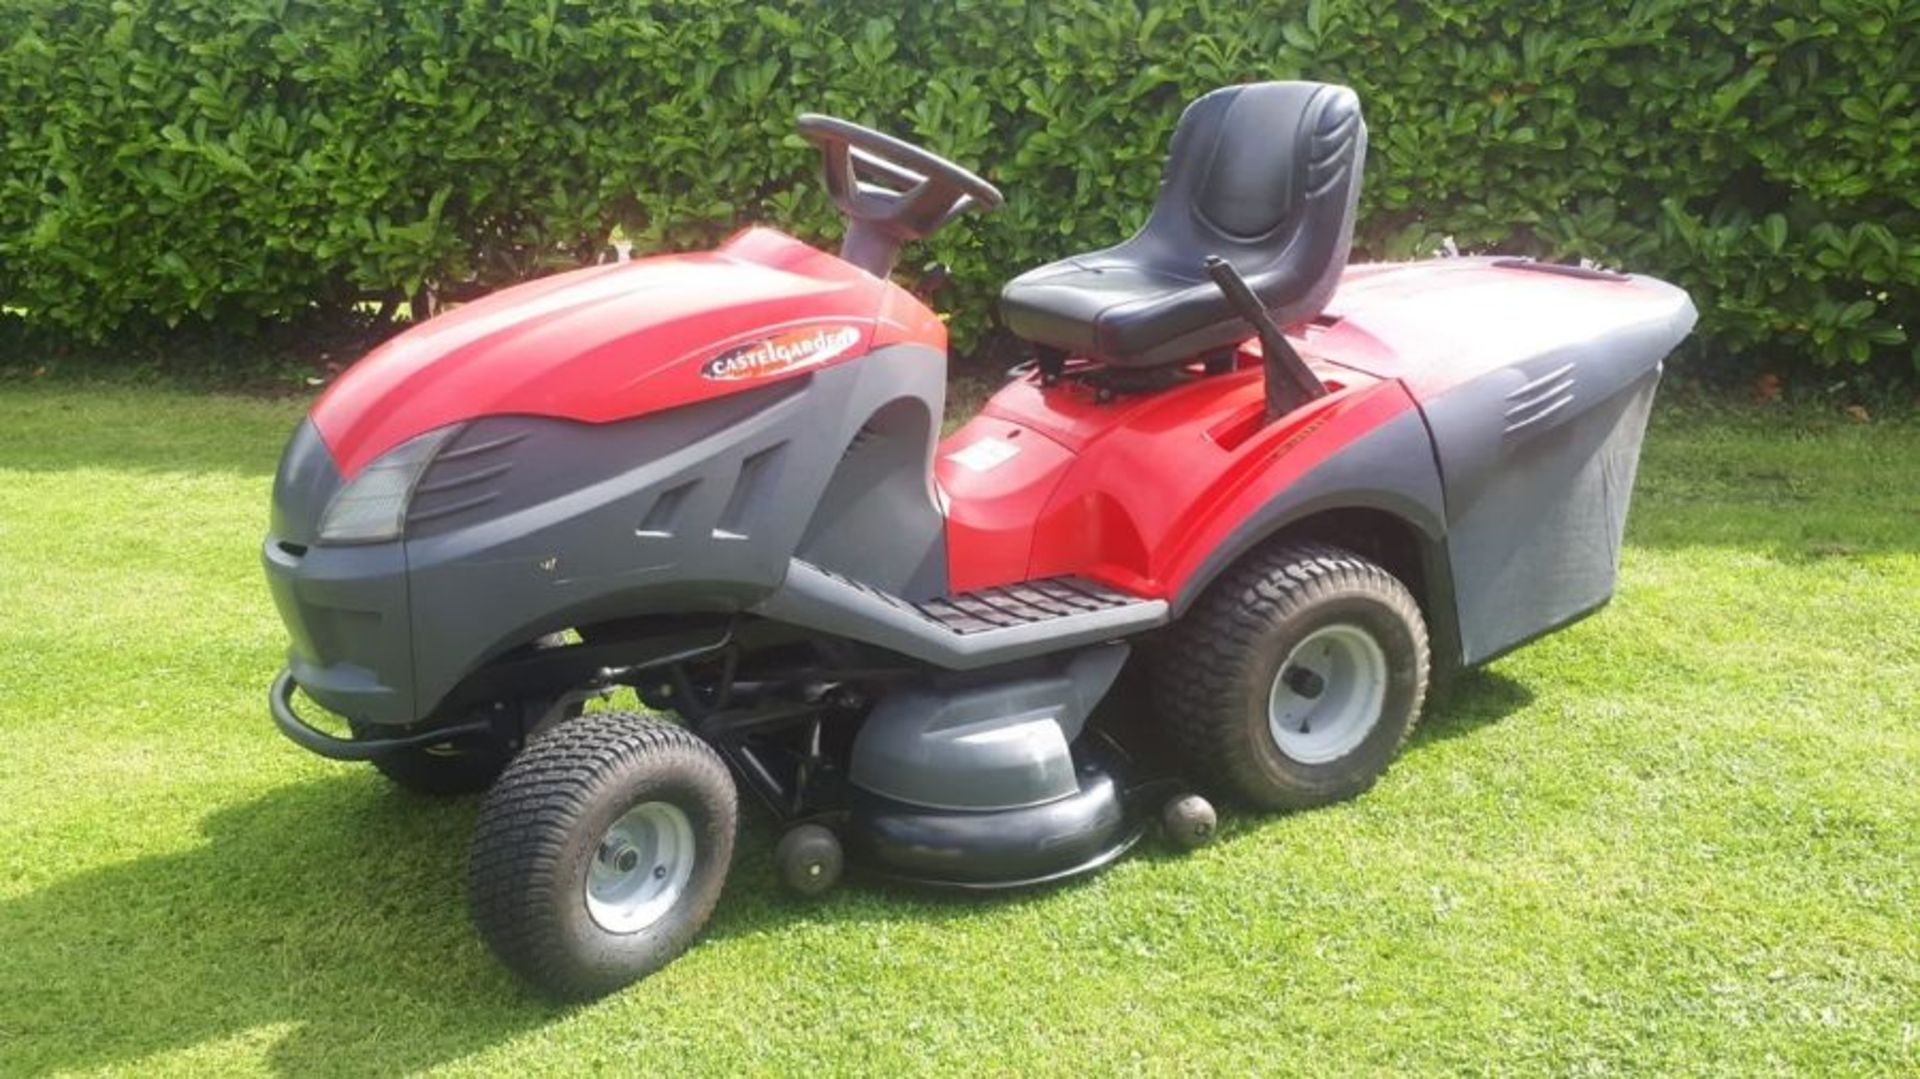 CASTELGARDEN PTX220 RIDE ON MOWER 22HP HYDROSTATIC 40" CUT WITH NEW DECK (FULLY WORKING)